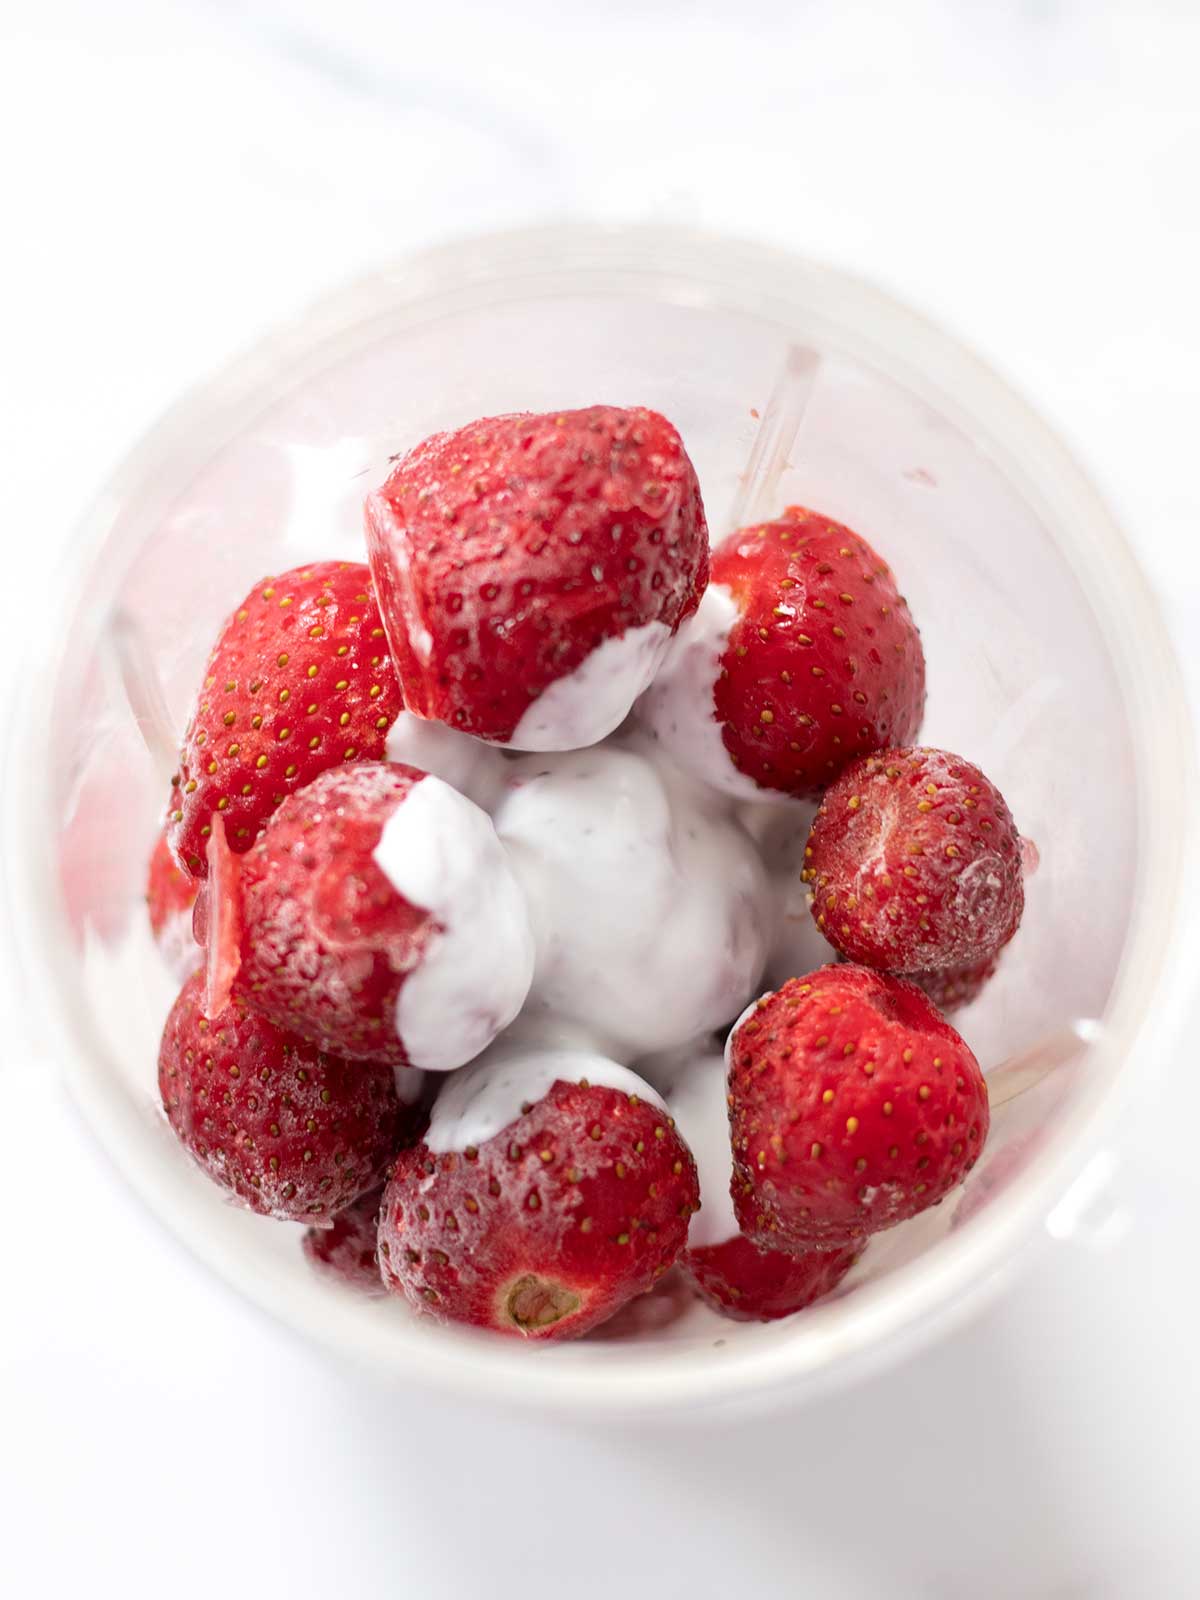 Brozen strawberries and dairy-free coconut milk in a blender cup